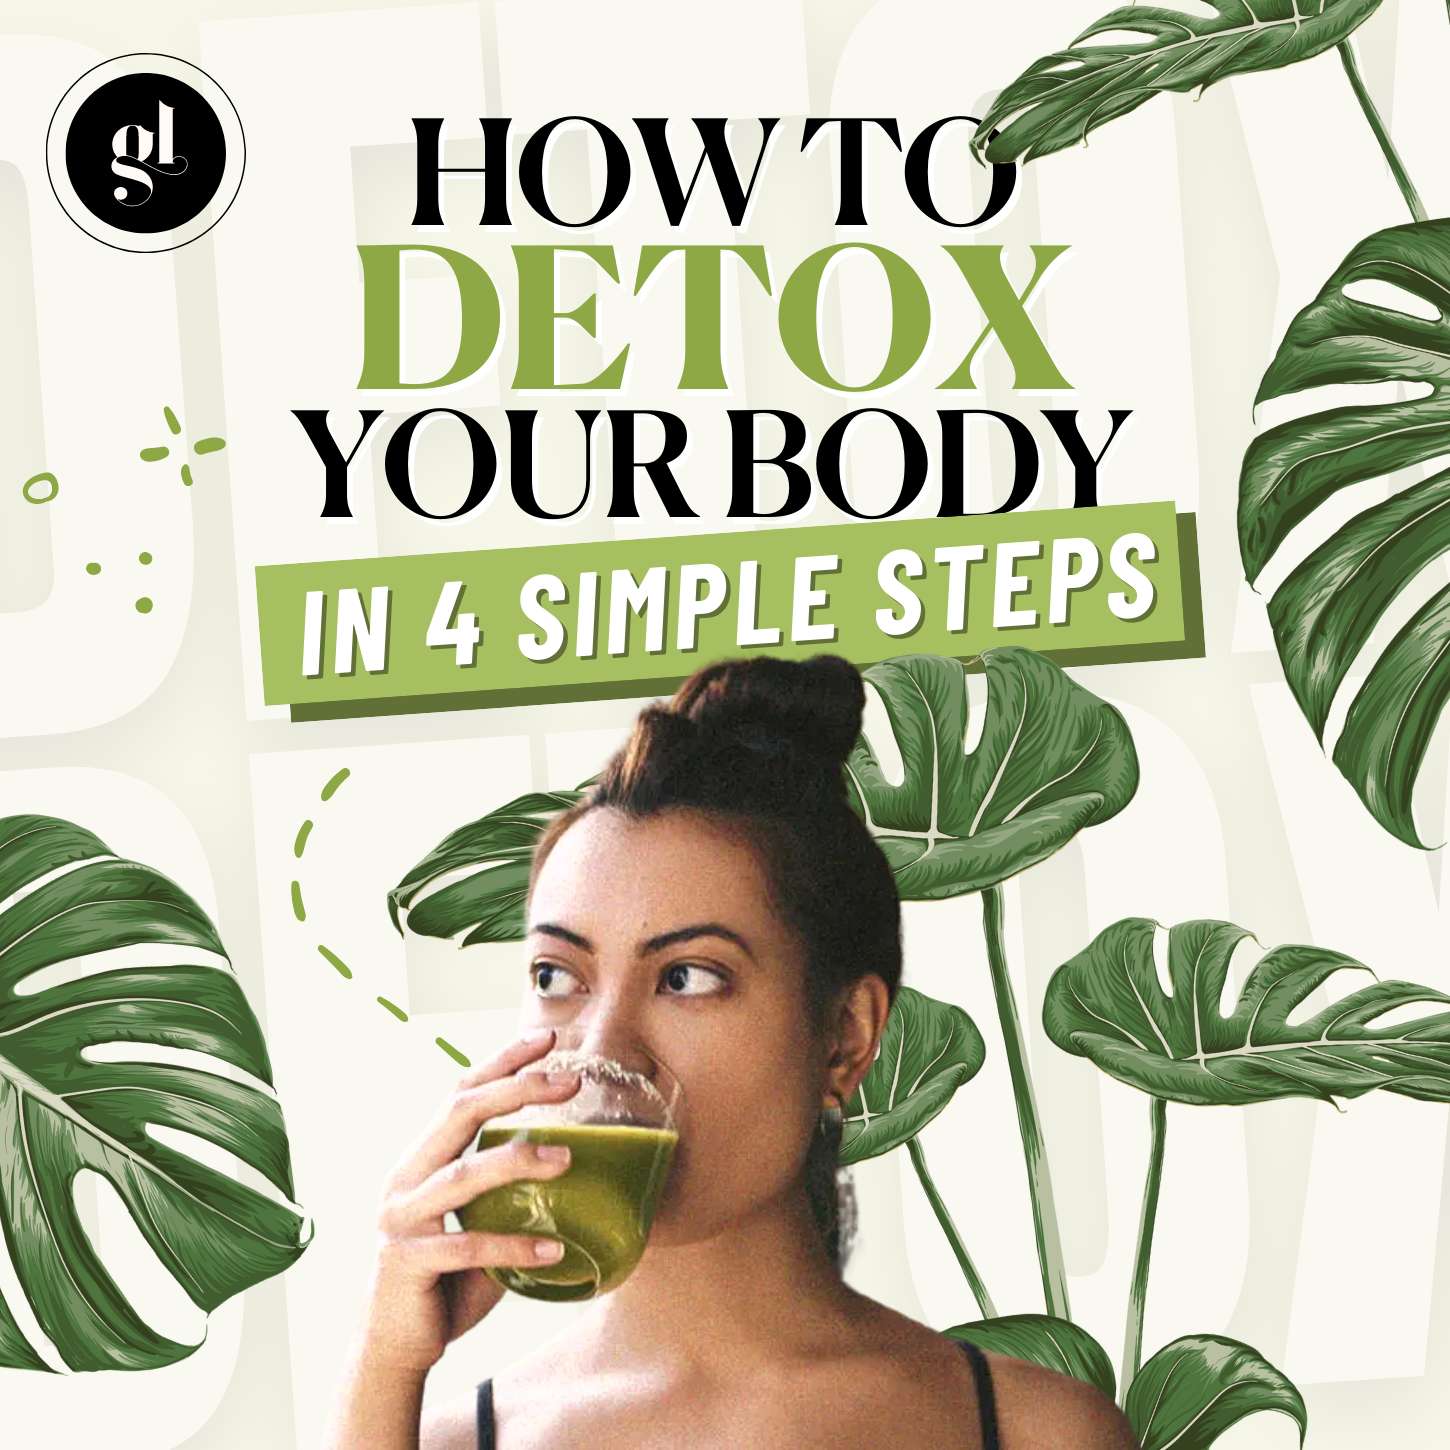 How to Detox Your Body in 4 Simple Steps